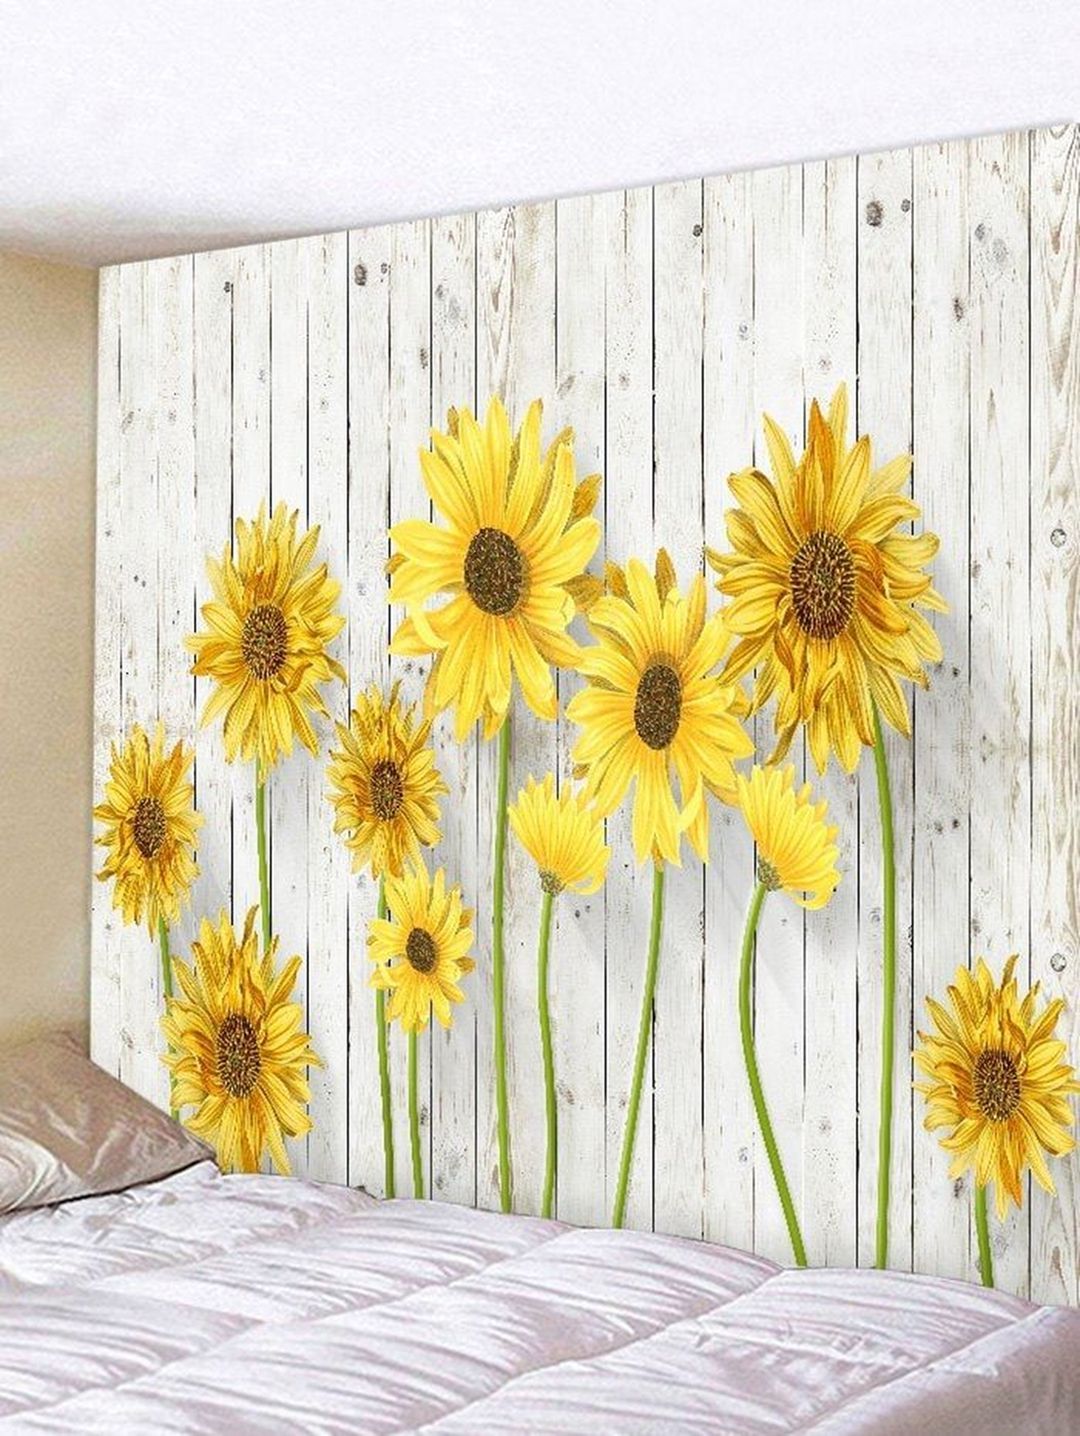 Marvelous Lovely 9 Diy Sunflower Bedroom Decoration Ideas Https With Regard To Sunflower Metal Framed Wall Art (View 9 of 15)